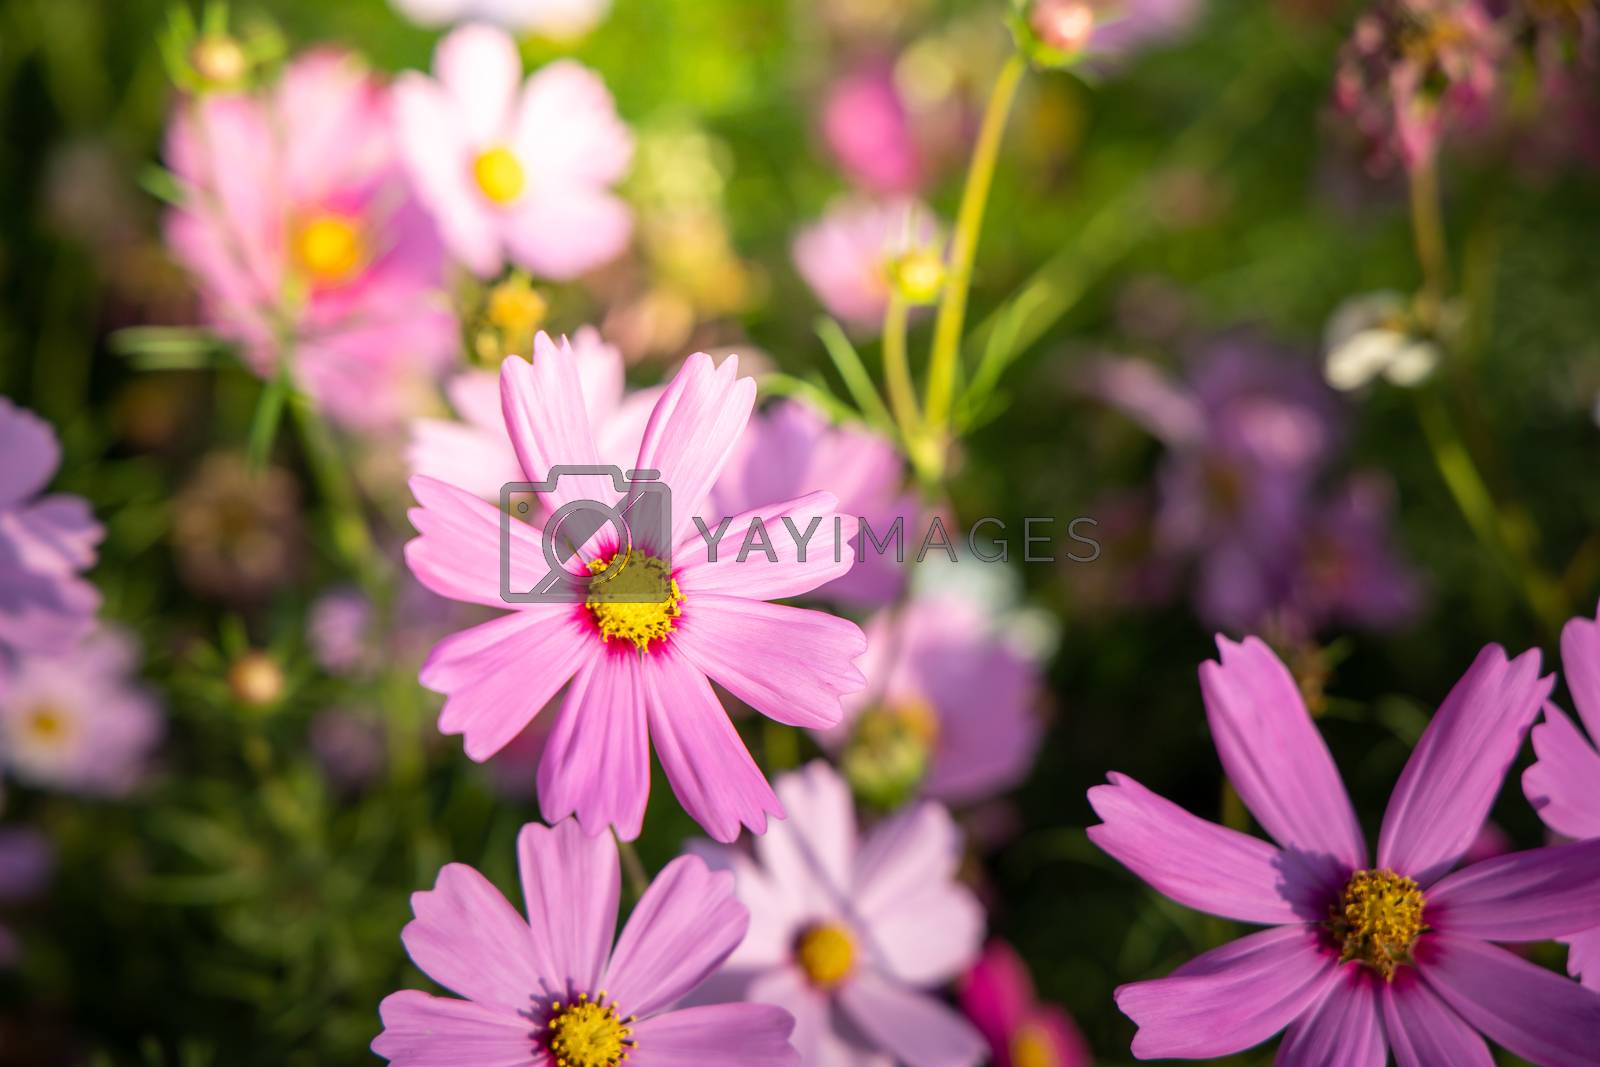 Royalty free image of  Beautiful Cosmos flowers in garden. Nature background. by teerawit